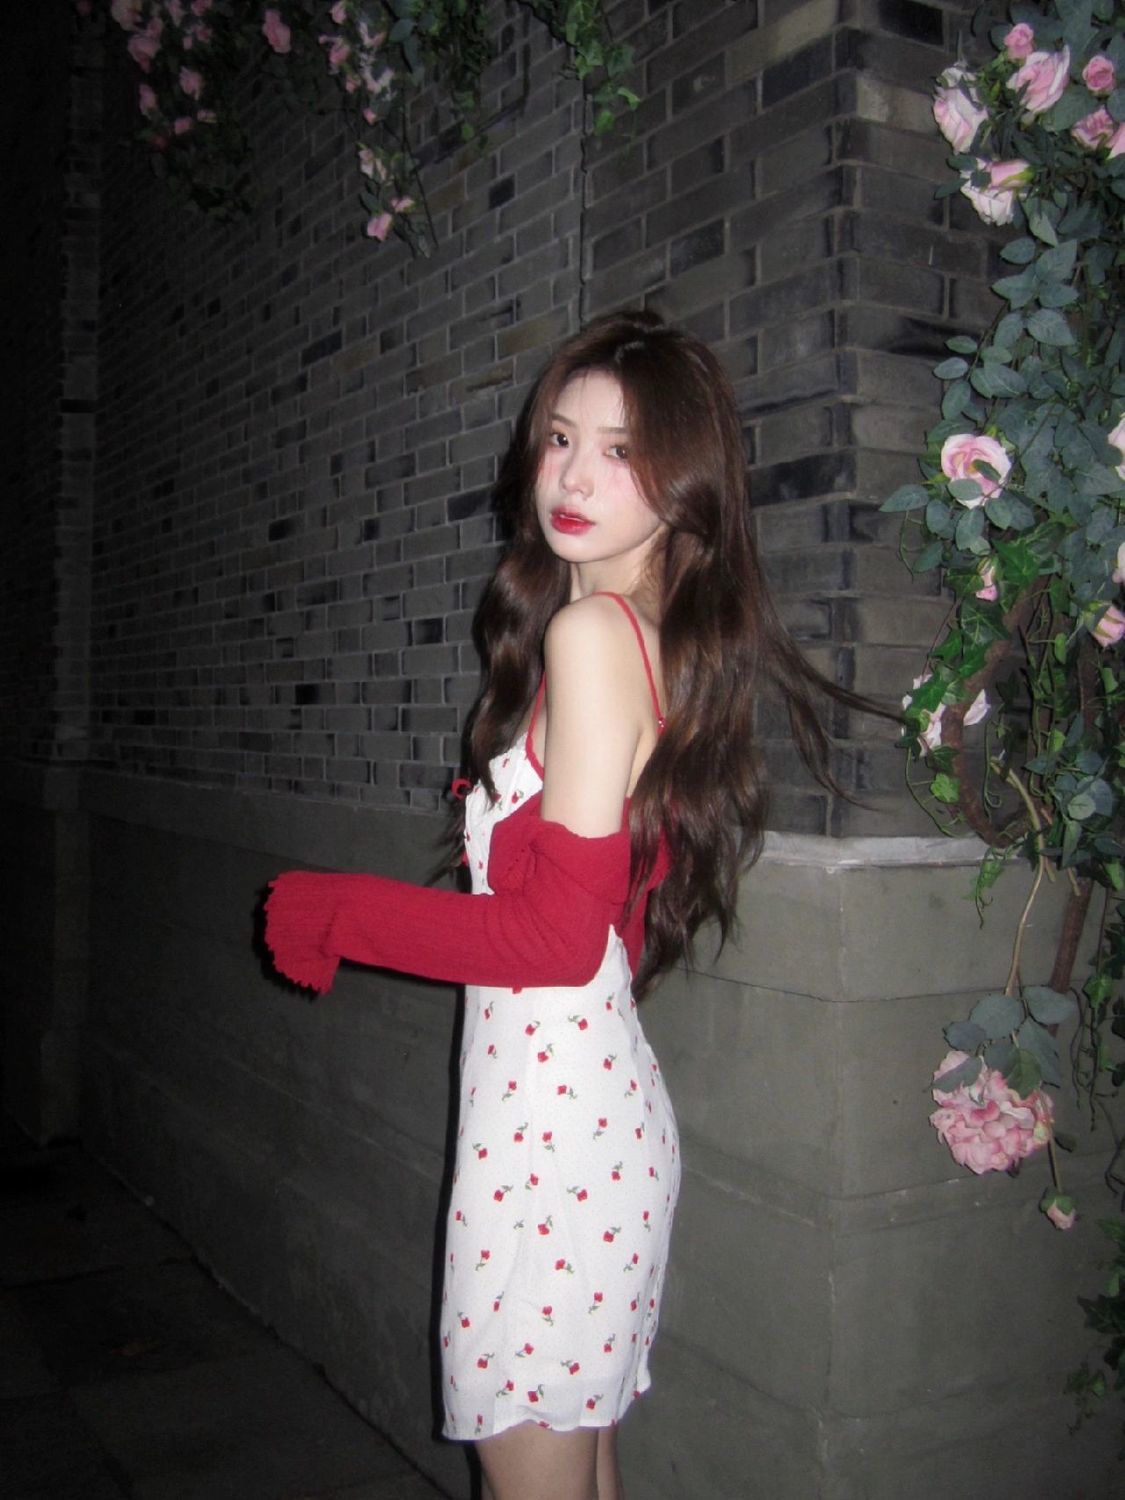 Red Sweater White Cherries Dress Outfit ON965